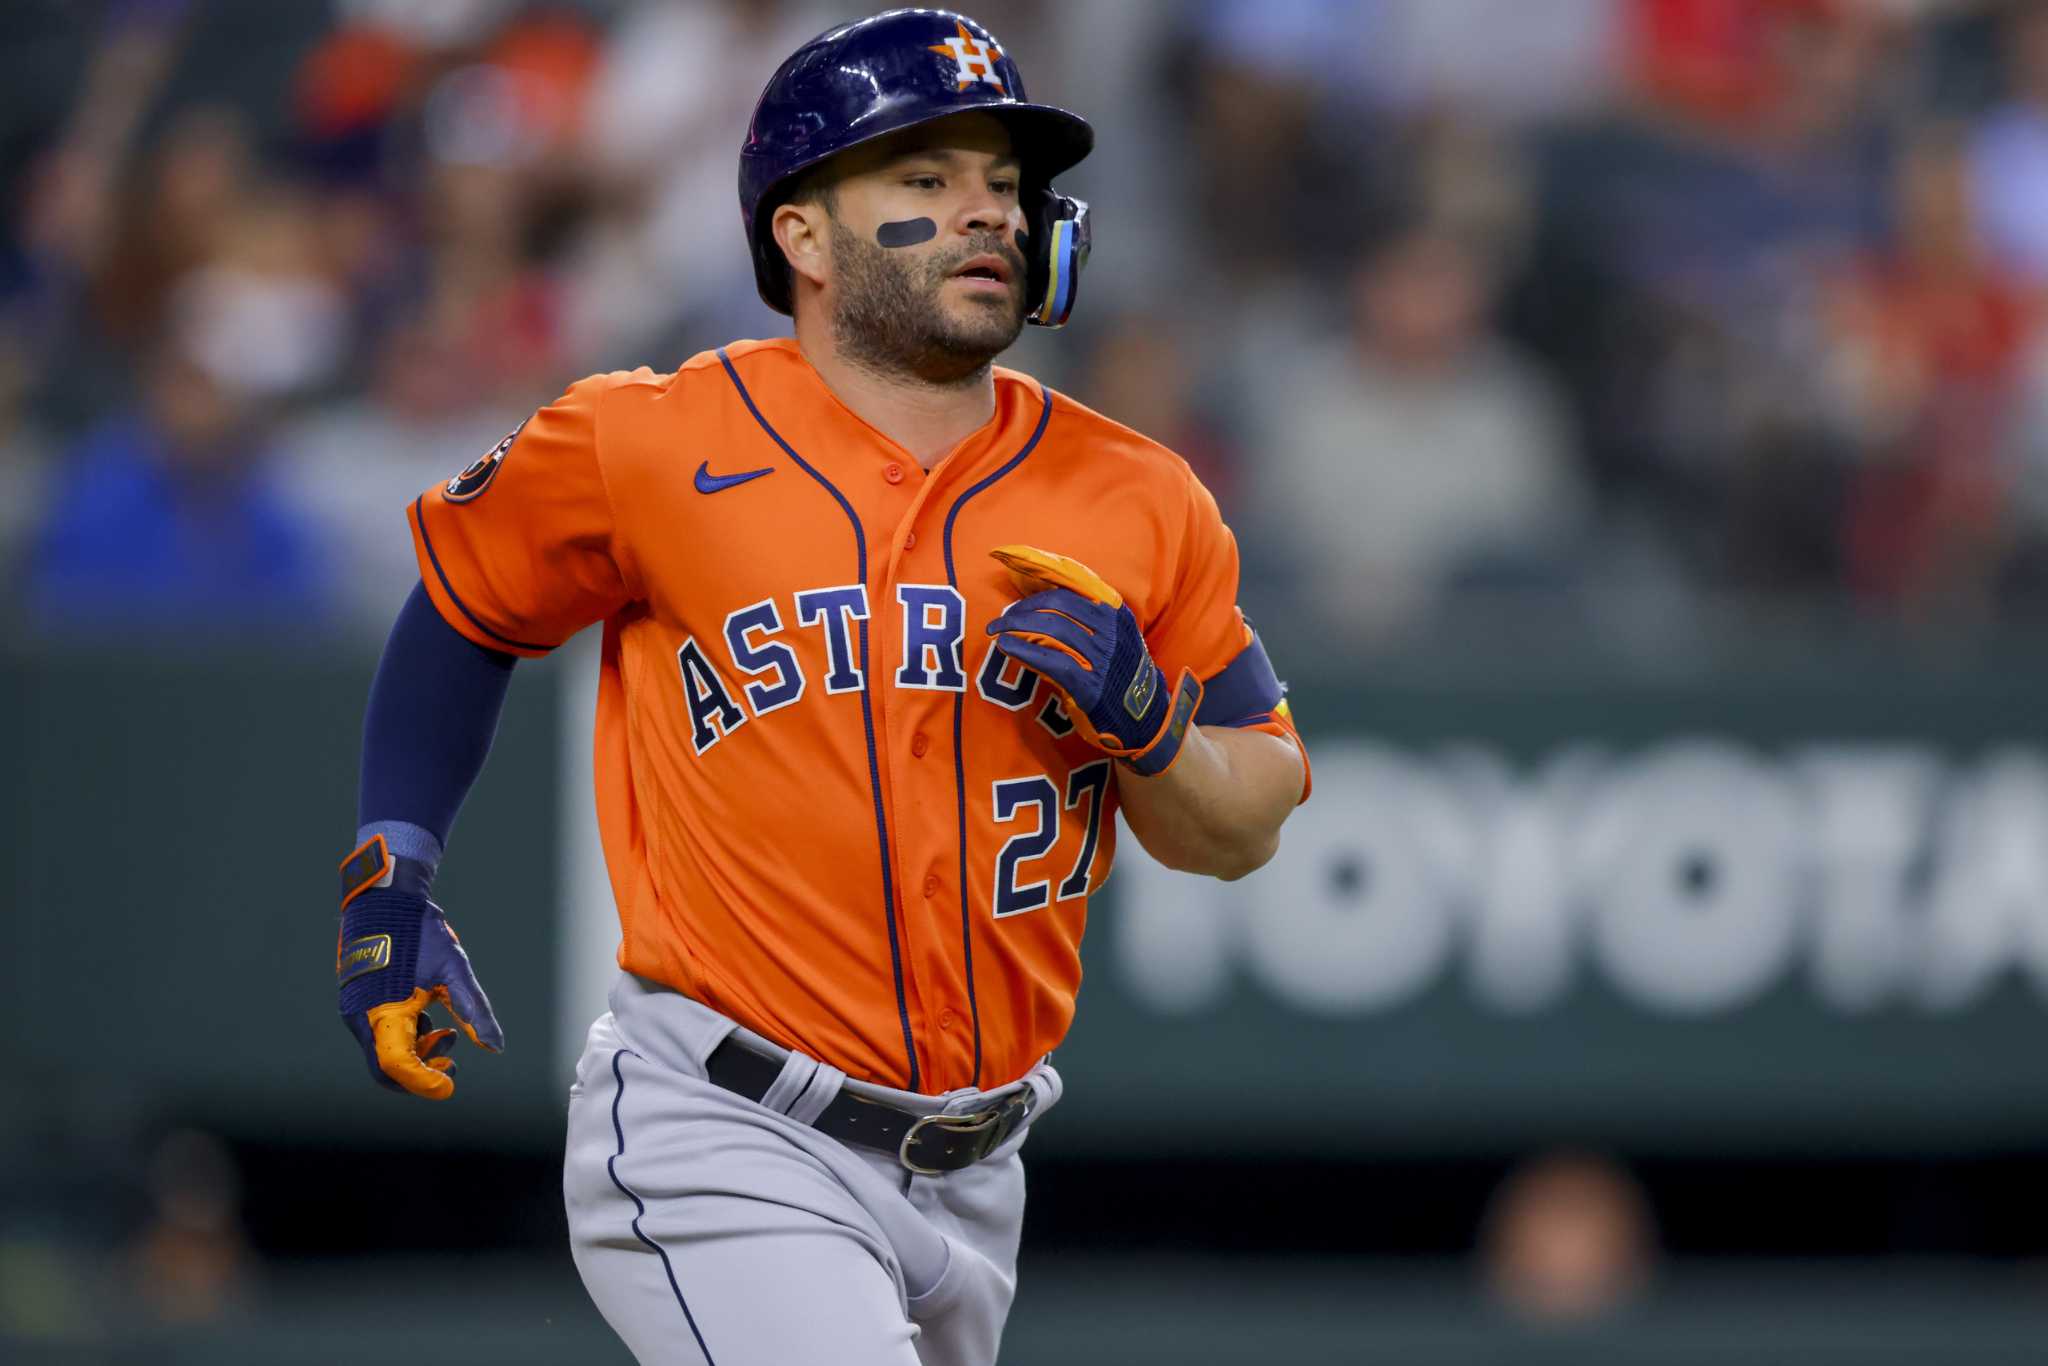 Astros' Jose Altuve out of lineup again, will have MRI on left oblique injury